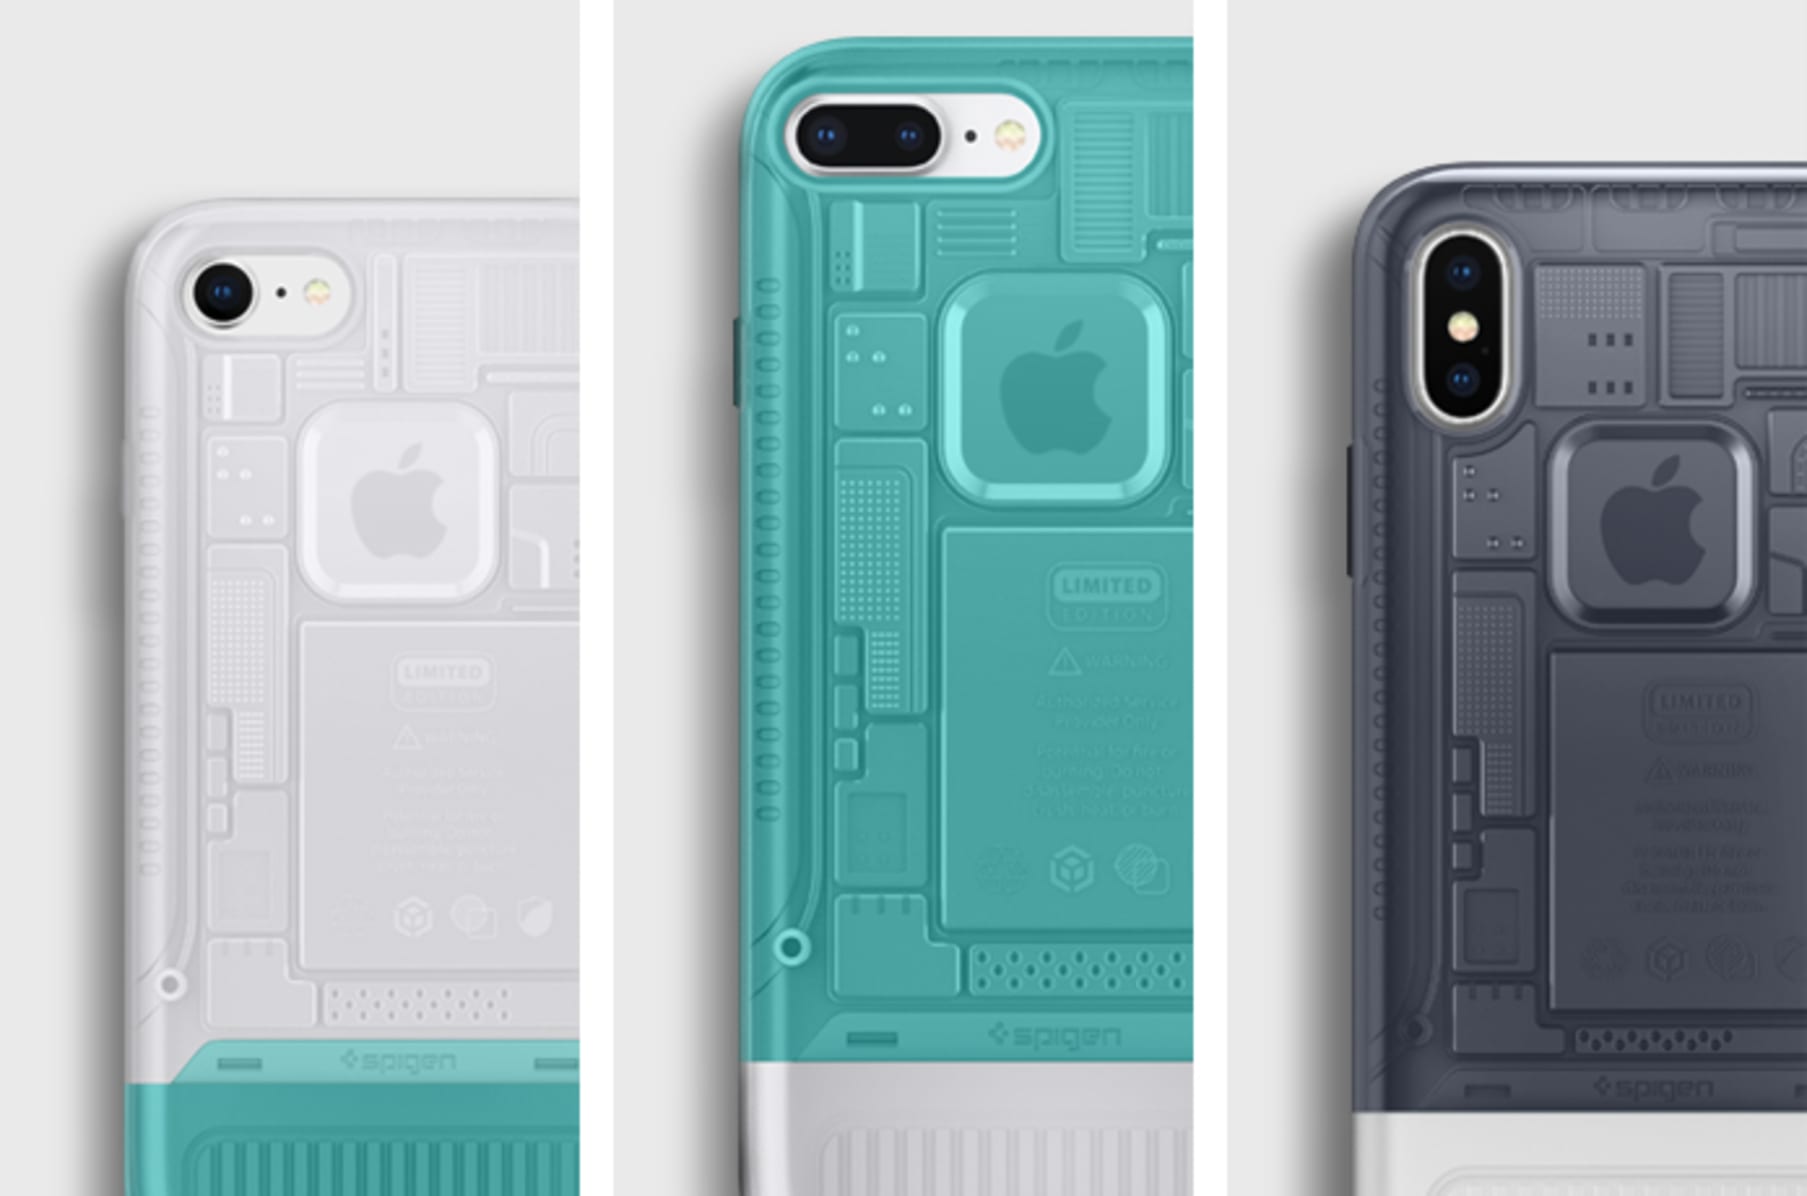 Spigen just dropped iMac G3-inspired cases for the new iPhone 15 Pro